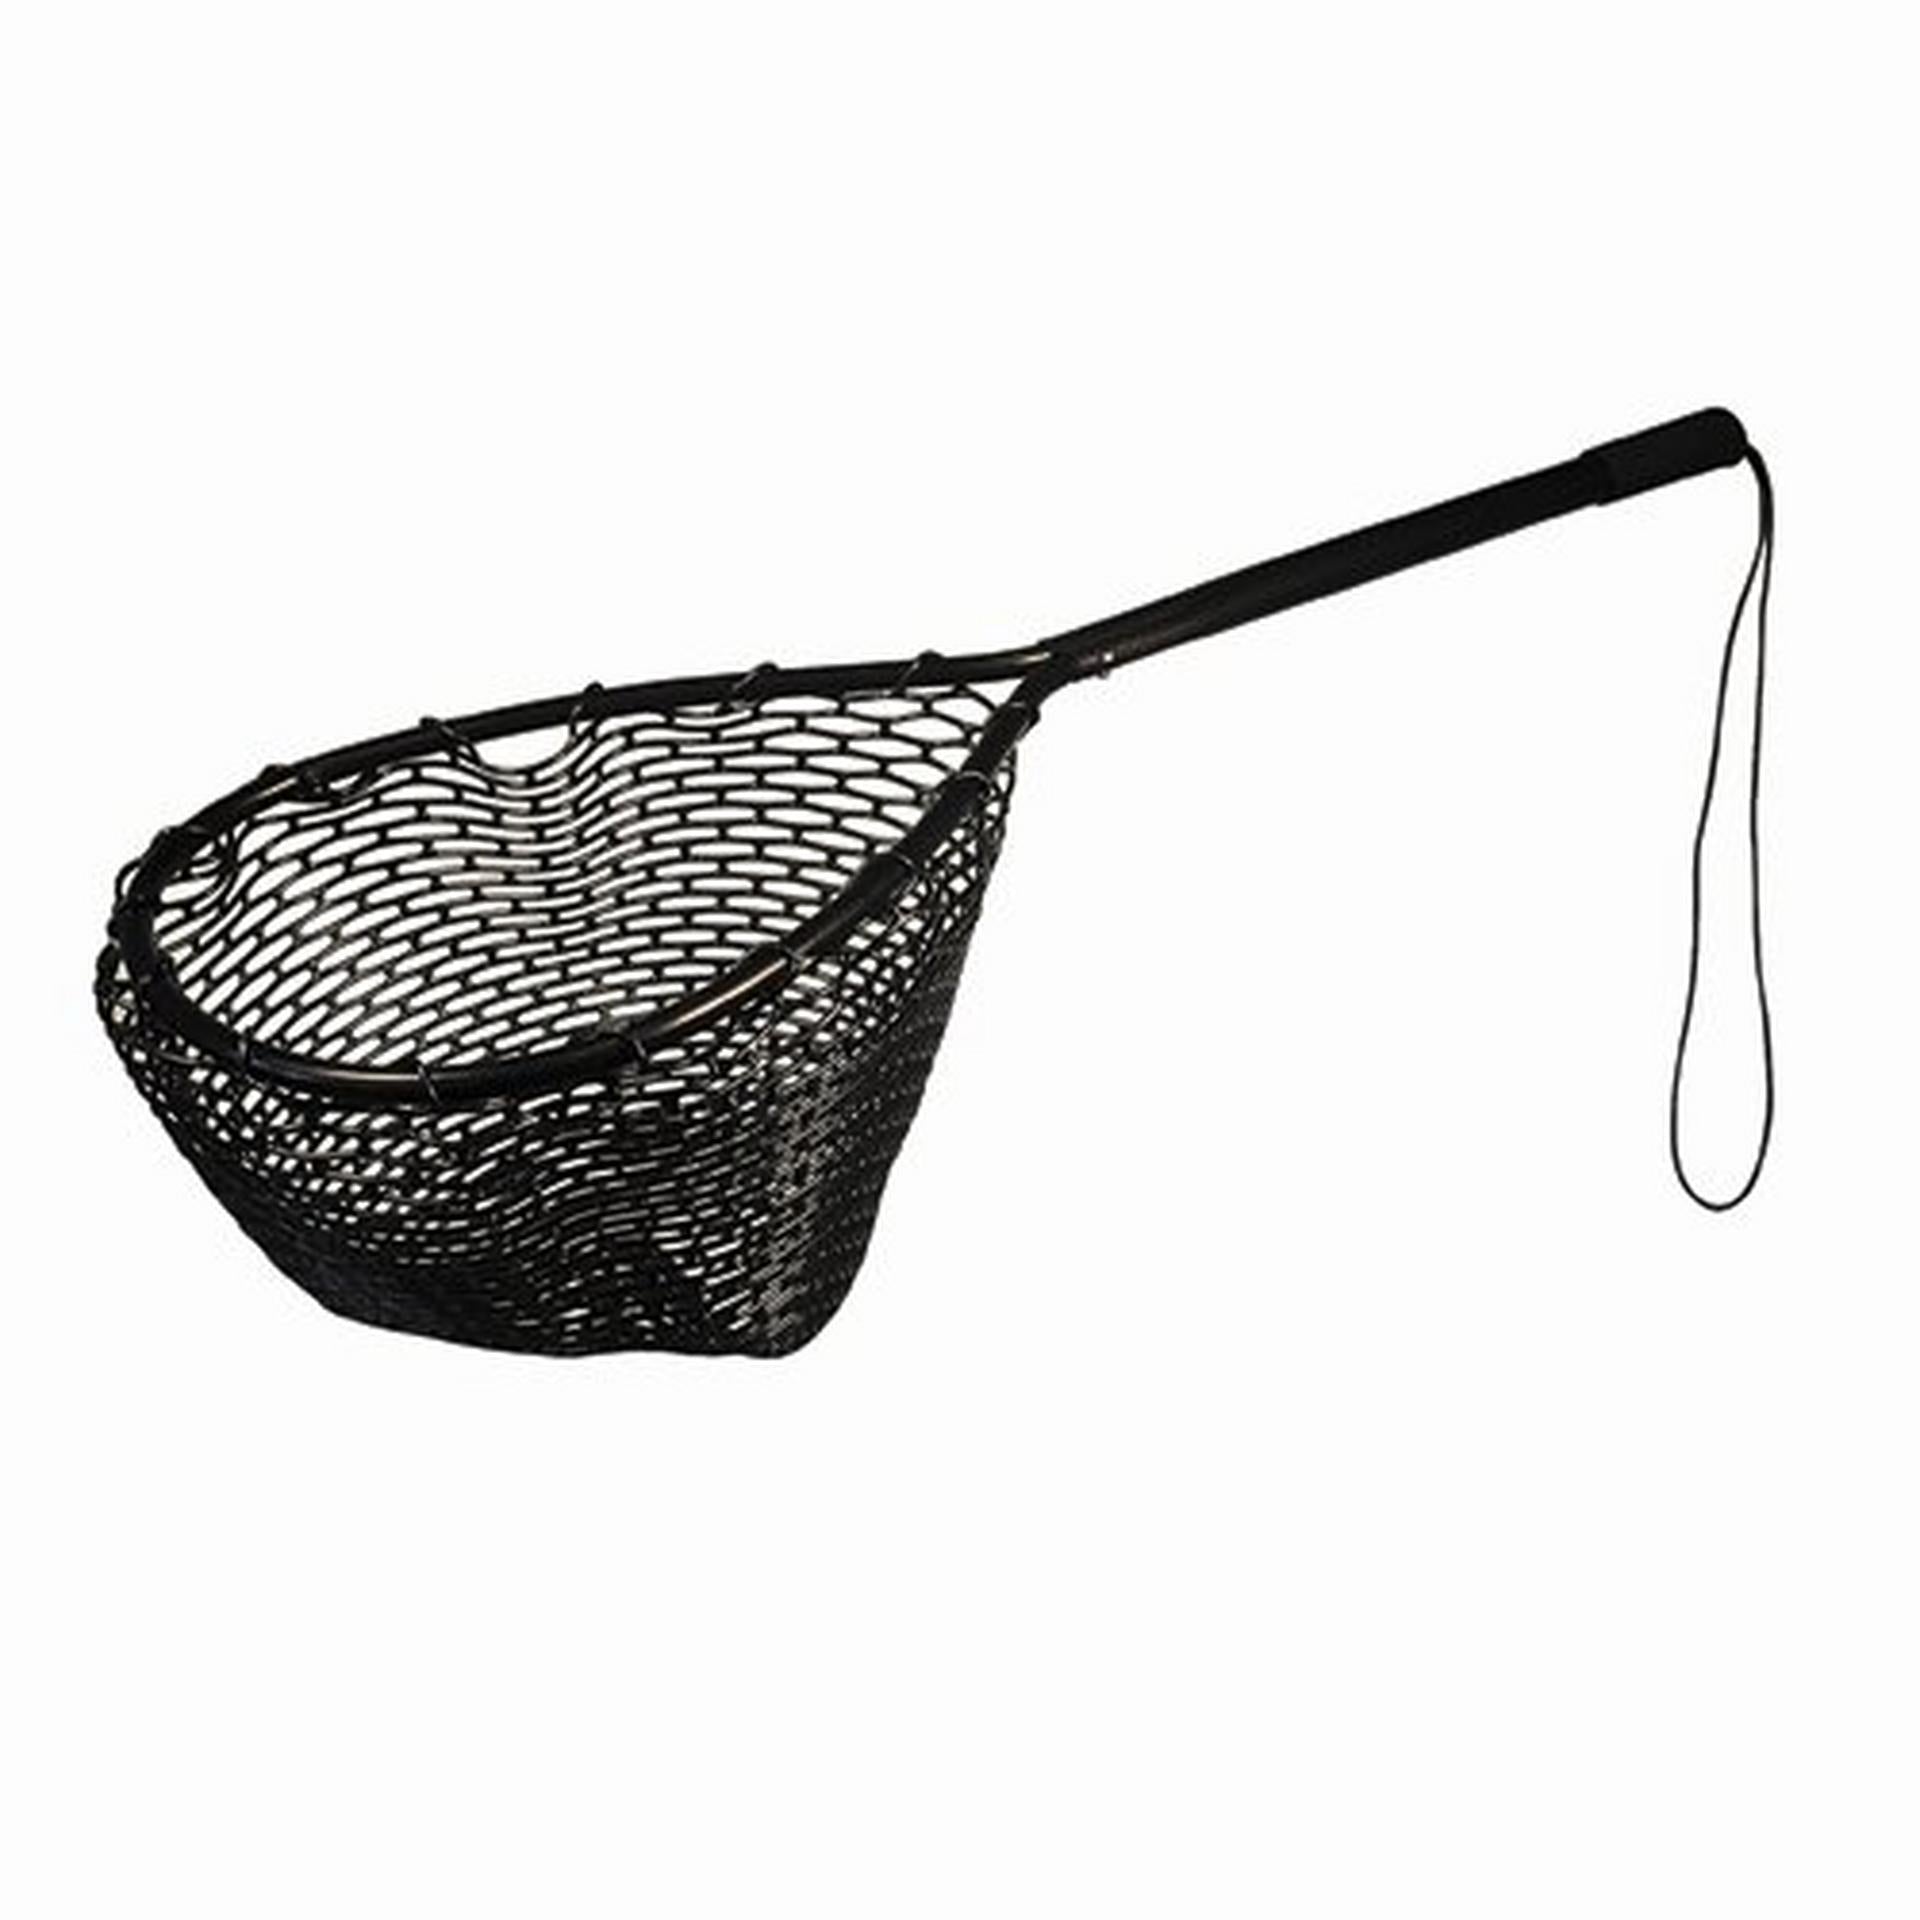 Products – Frabill Fishing